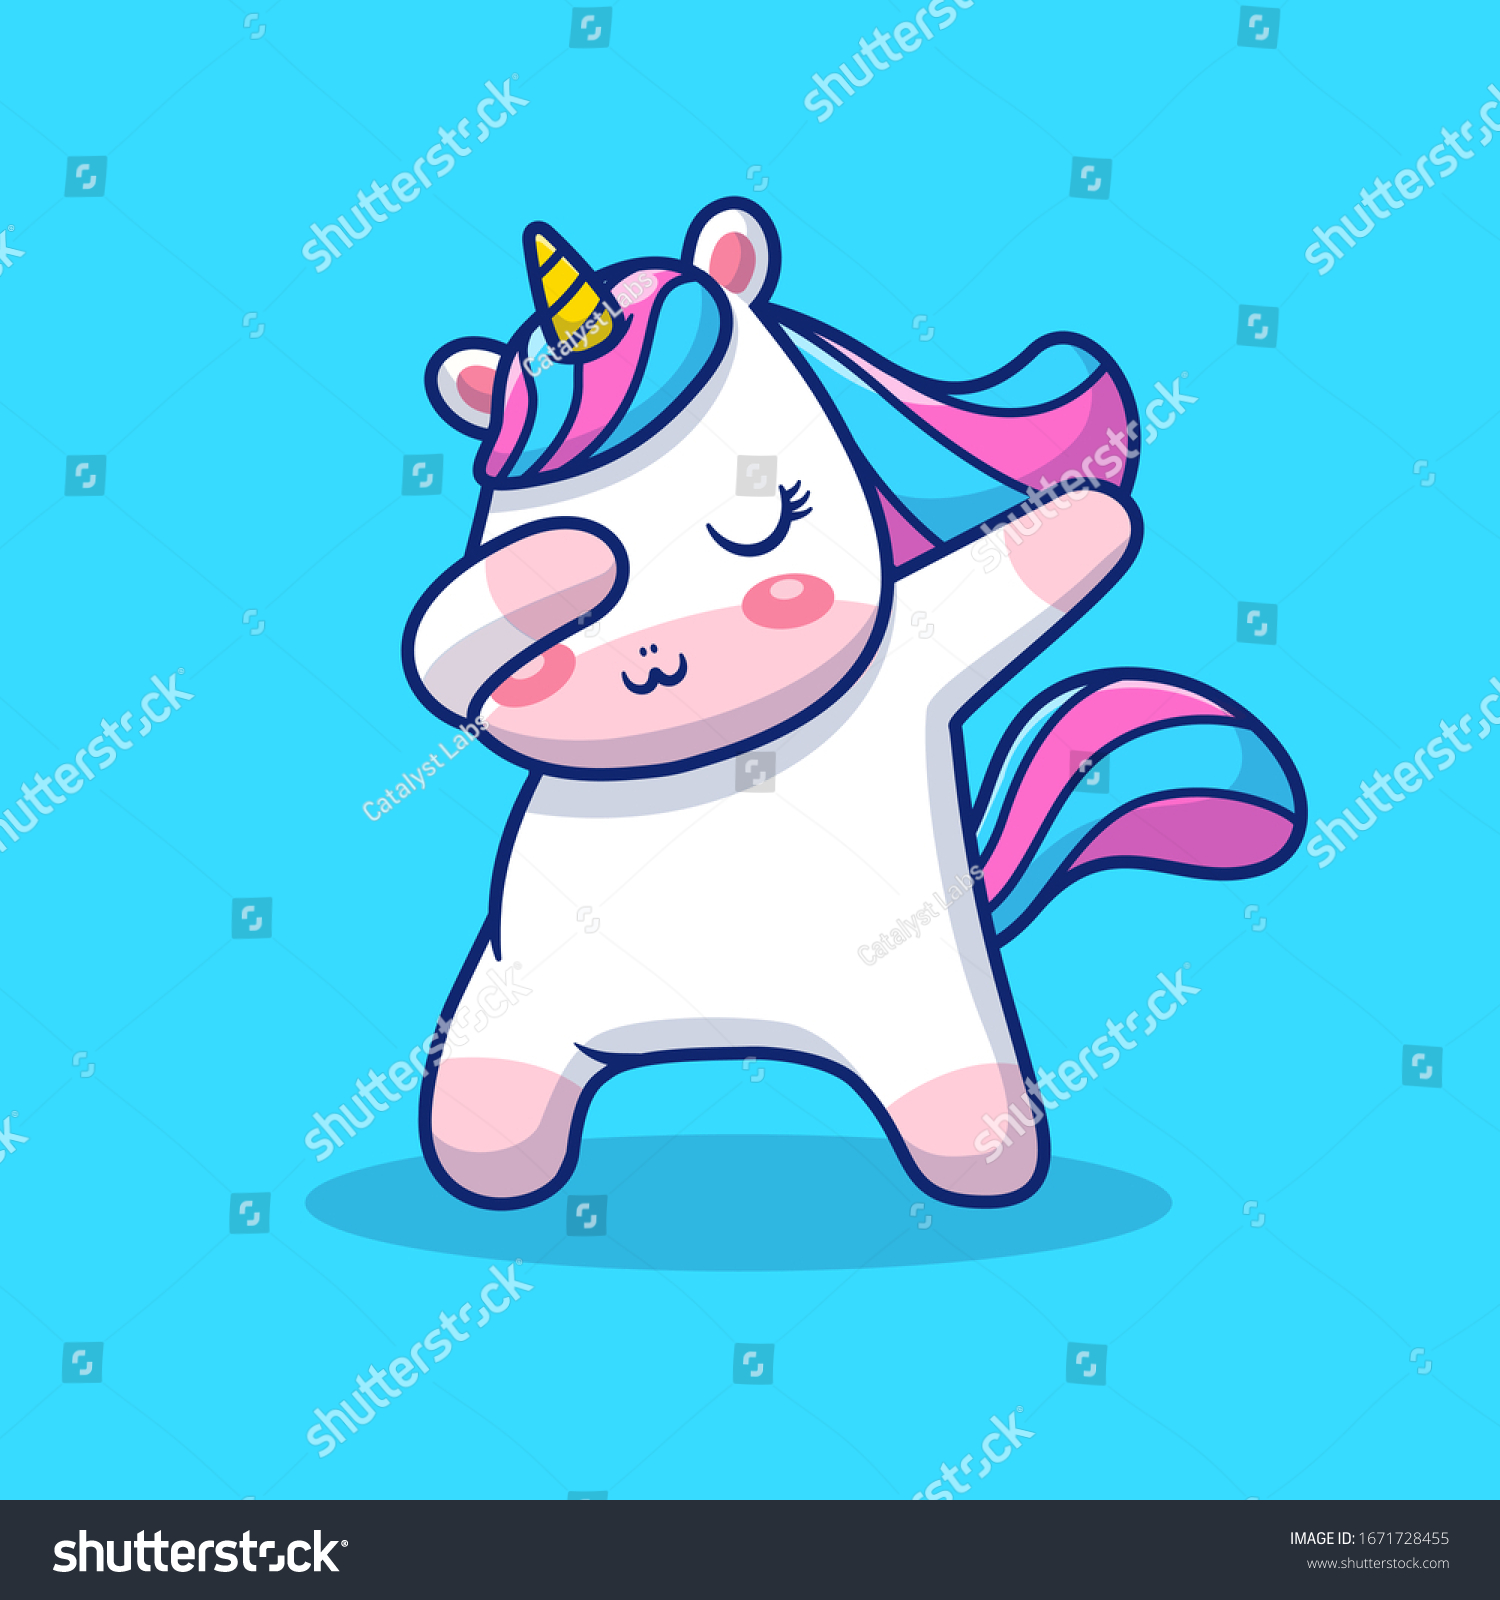 SVG of Cute Unicorn Dabbing Vector Icon Illustration. Unicorn Mascot Cartoon Character. Animal Icon Concept White Isolated. Flat Cartoon Style Suitable for Web Landing Page, Banner, Flyer, Sticker, Card svg